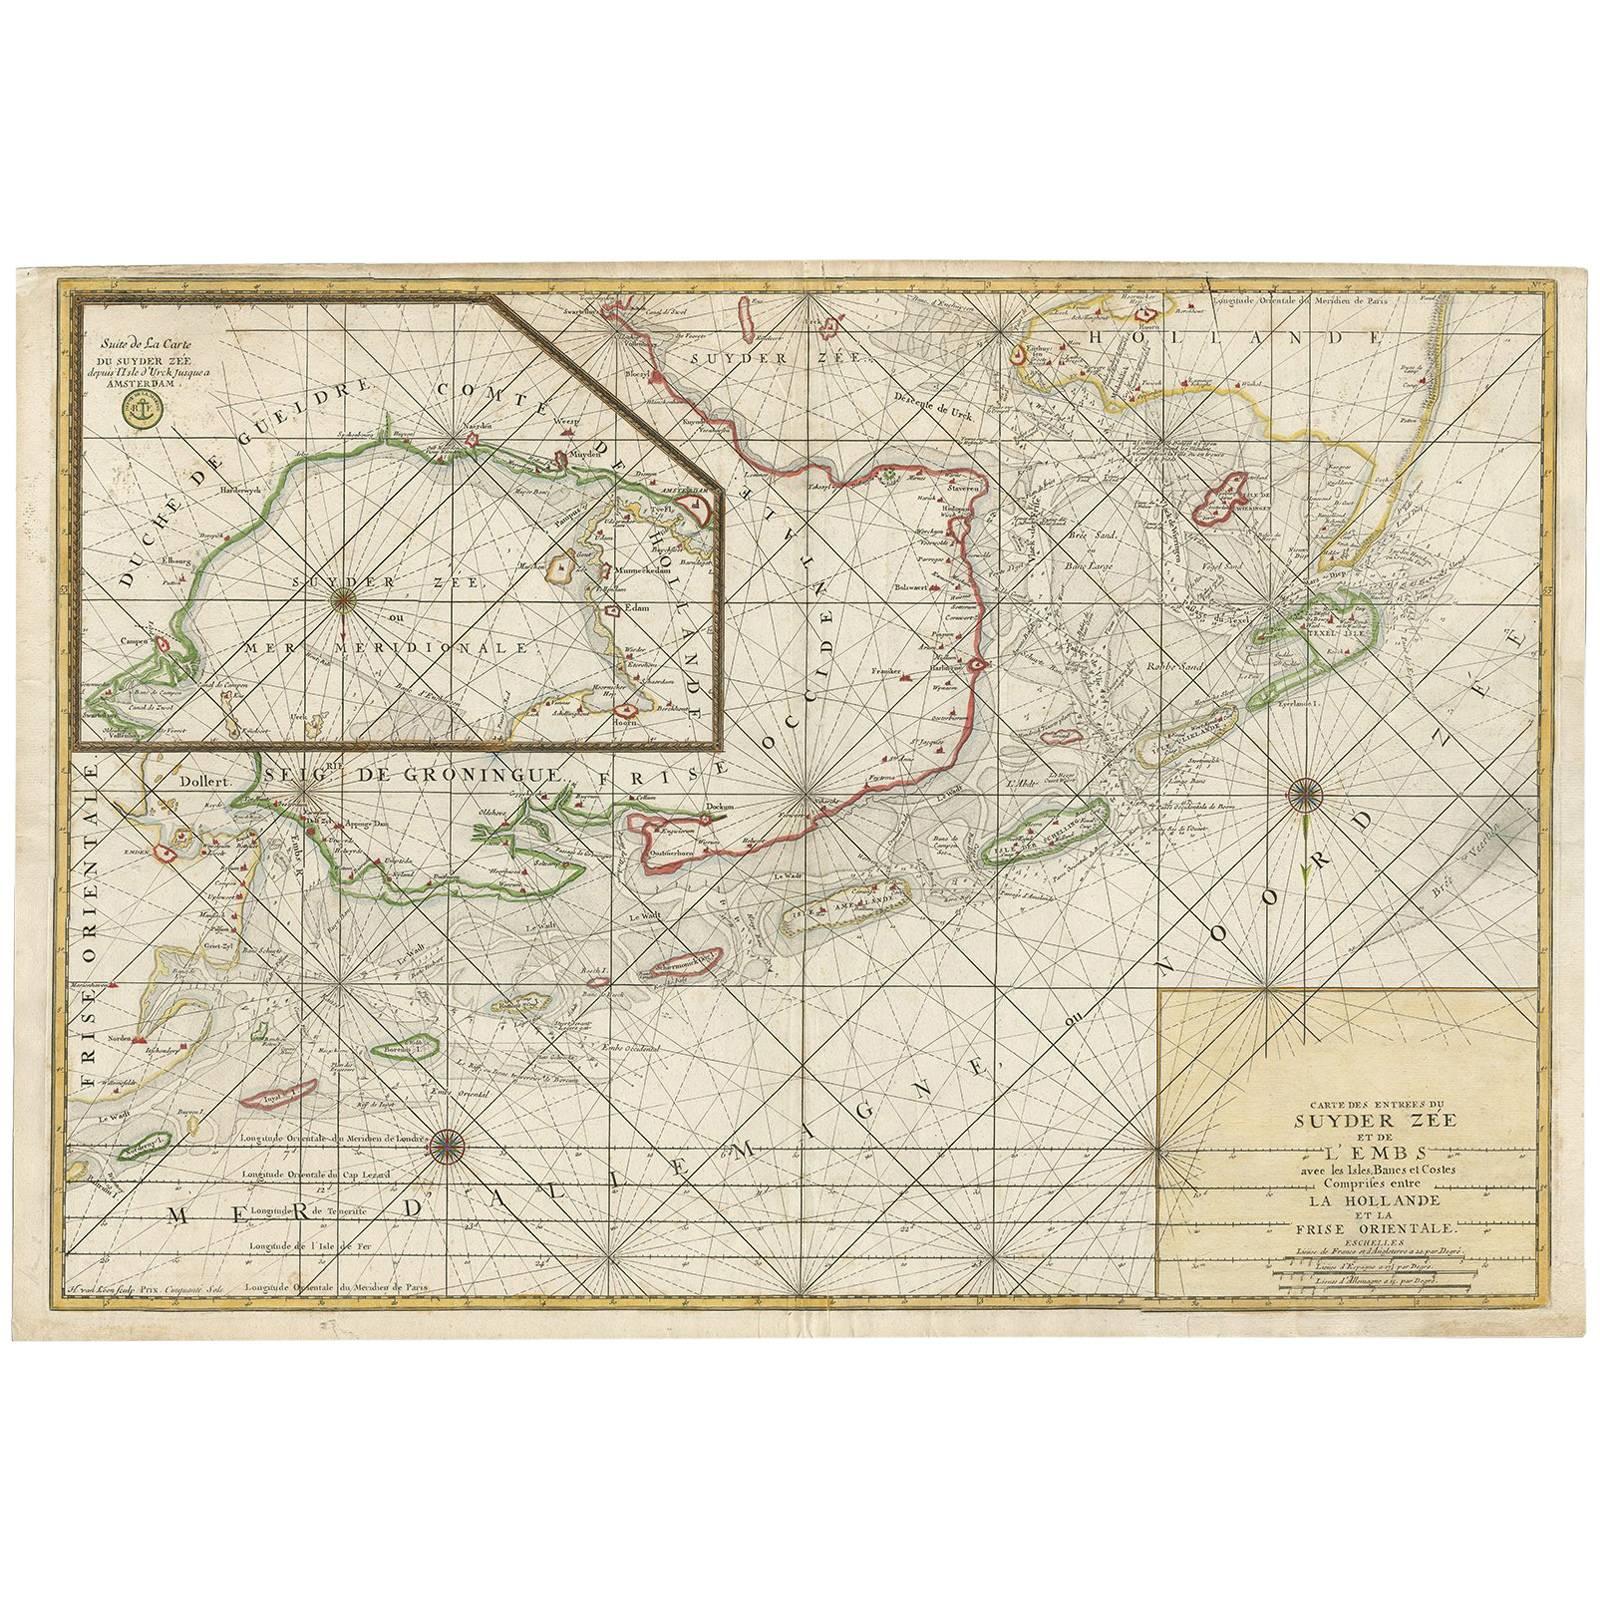 Large Sea Chart of the Zuyder Zee & The Northsea with the Wadden Islands, 1773